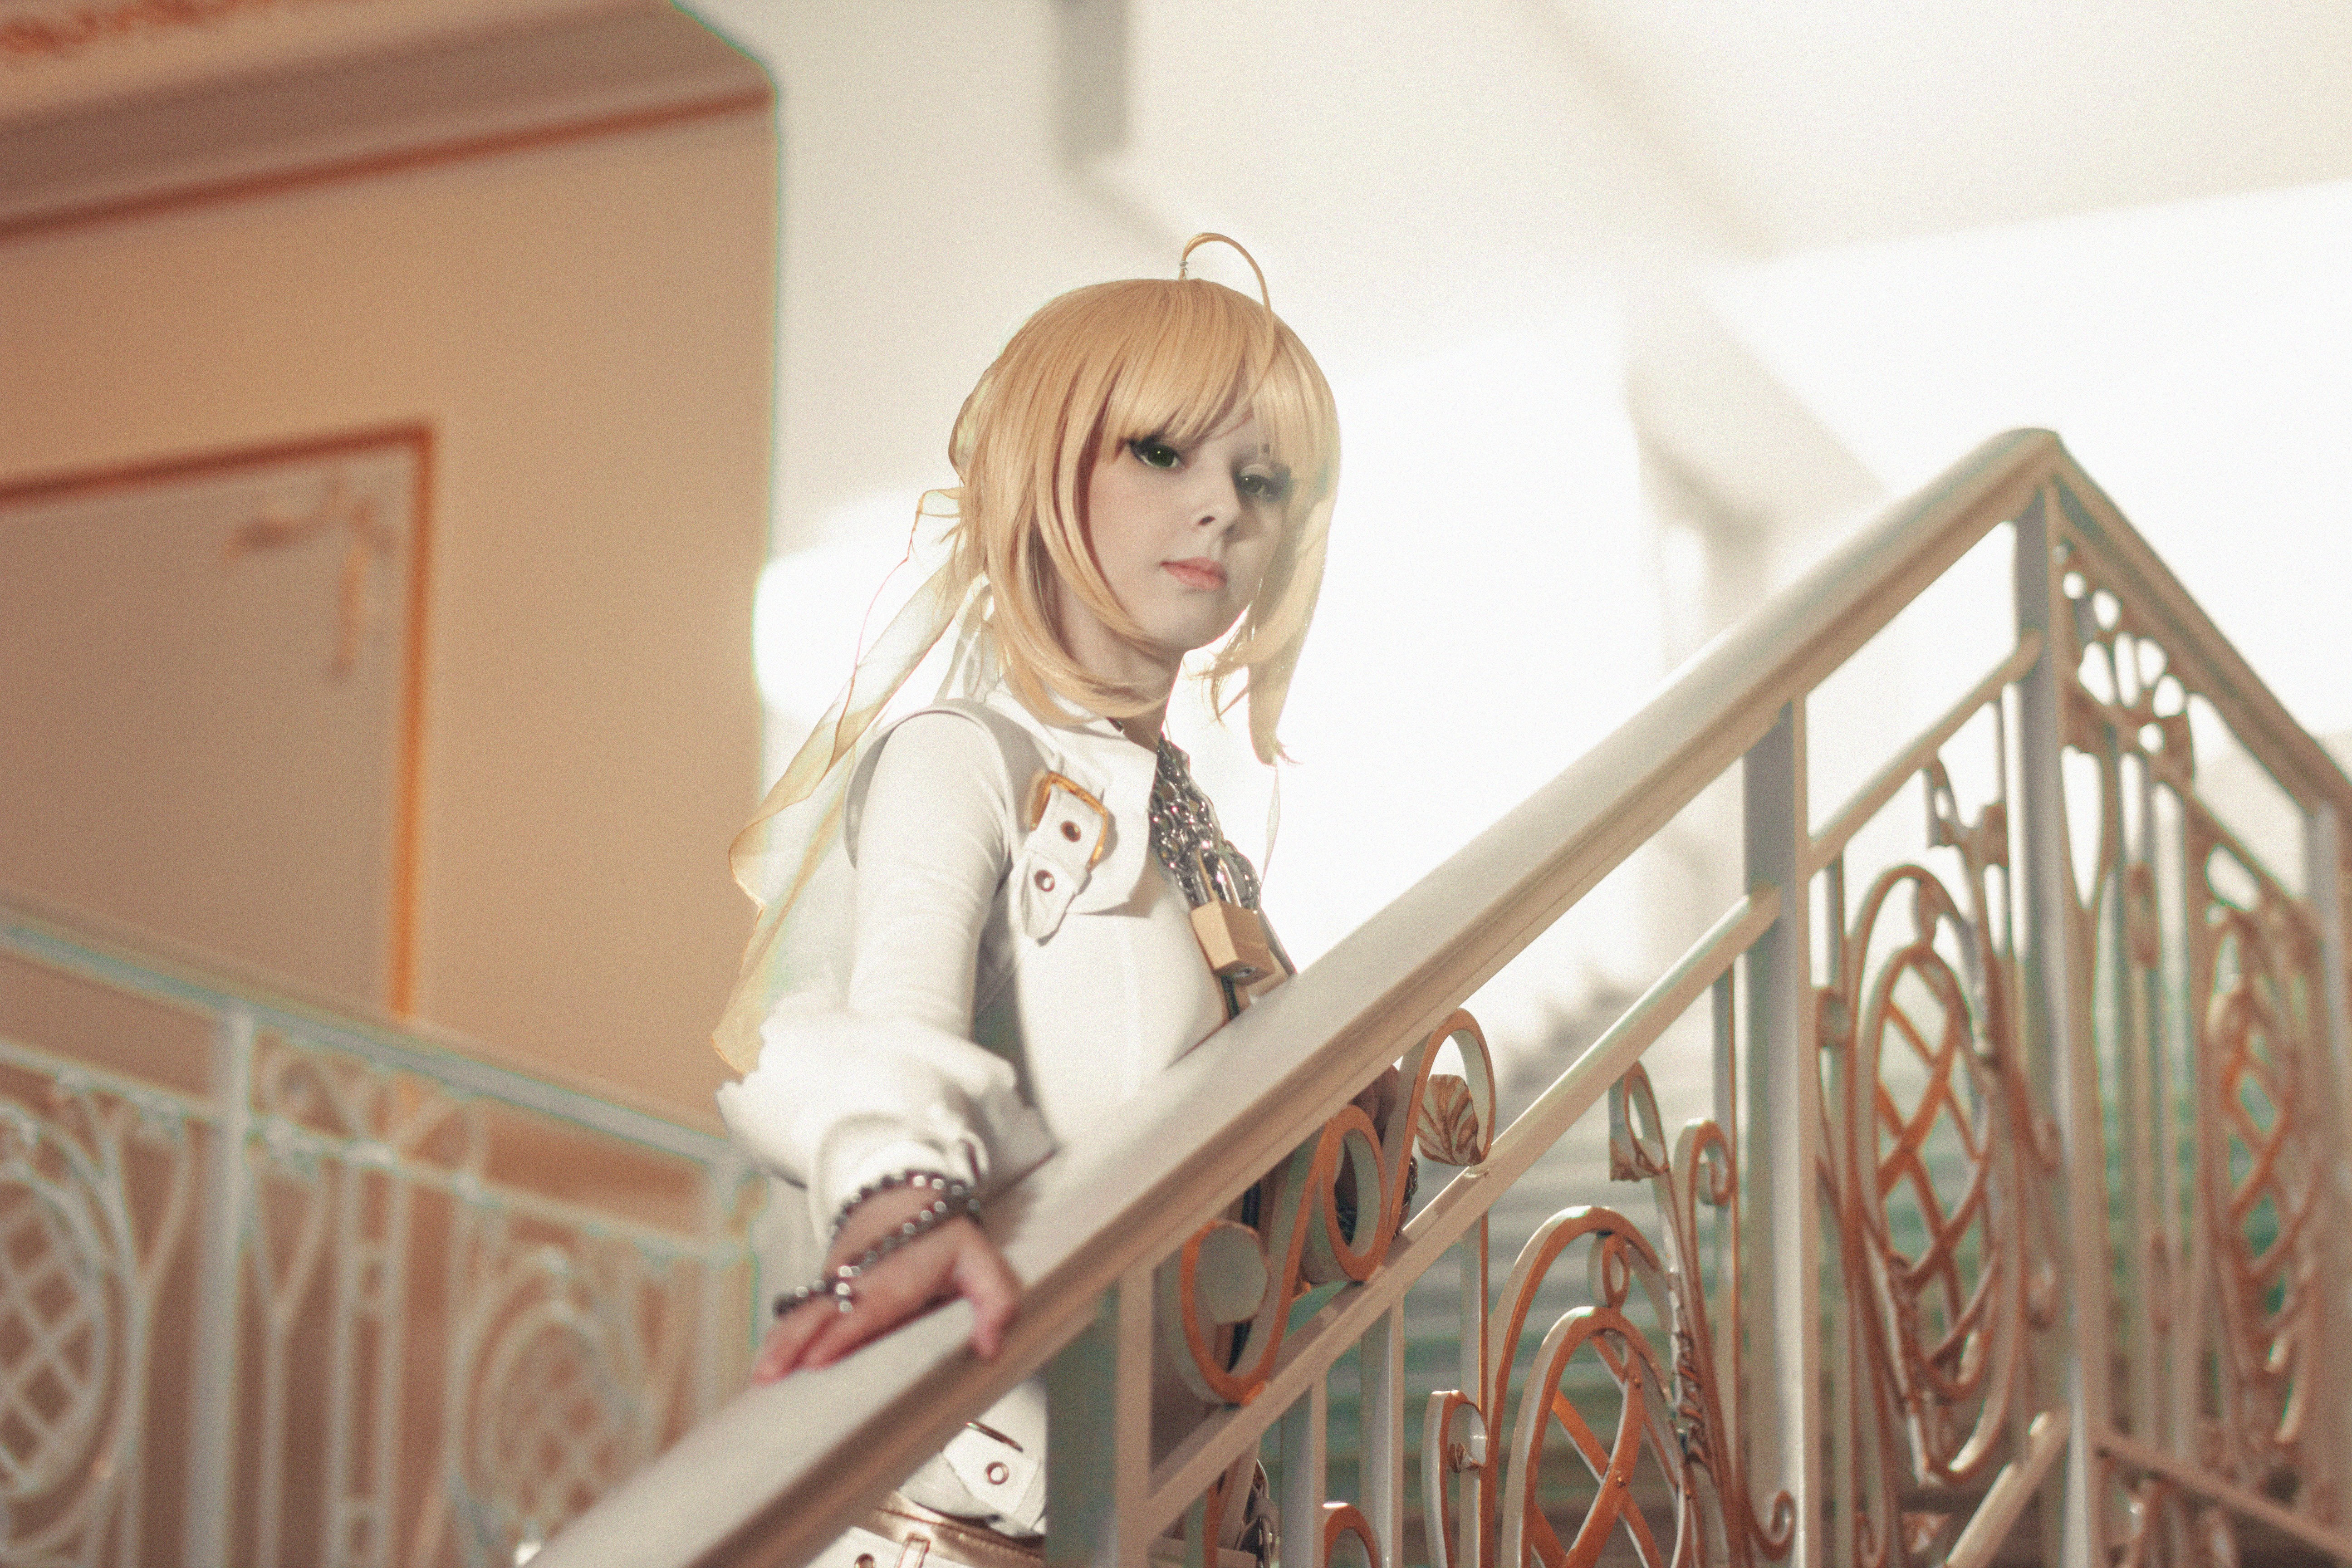 Suits Long Hair Blonde Blue Eyes Leather Boots Leather Clothing Stairs Saber Bride Helly Von Valenti 5184x3456